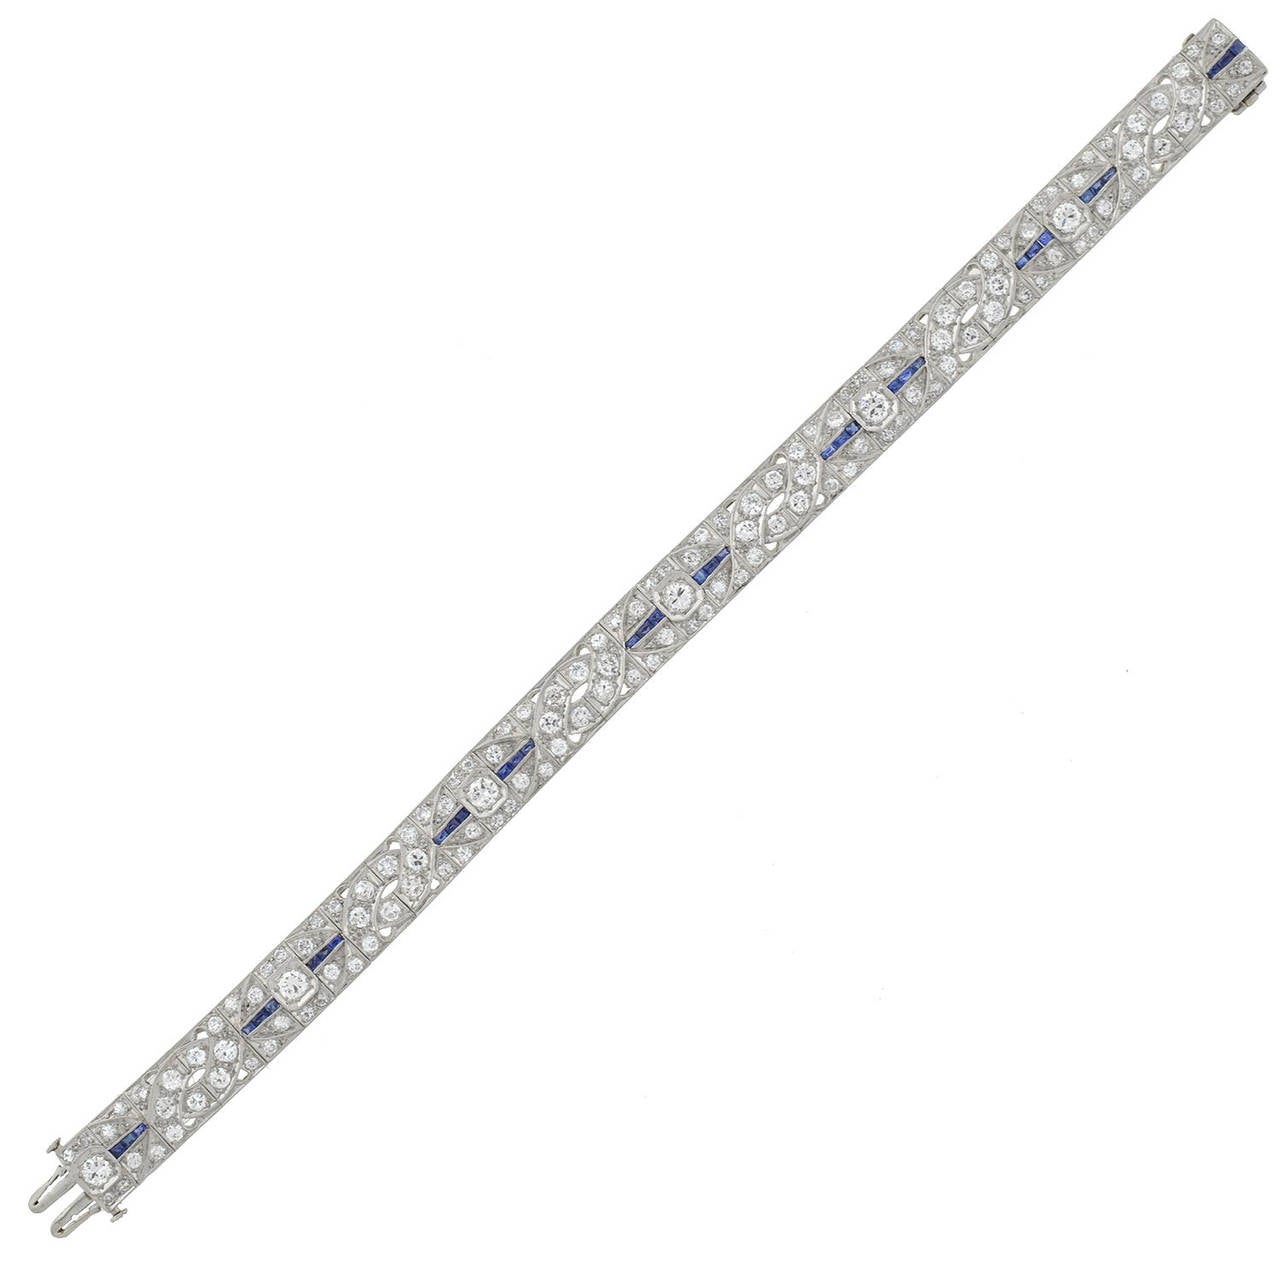 An absolutely stunning line bracelet from the Art Deco (ca1930s) era! Made of platinum, this gorgeous piece has approximately 5 carats of diamonds which have H/I Color and VS1-2 clarity and 1.25 carats of calibrated French cut sapphires. Comprised